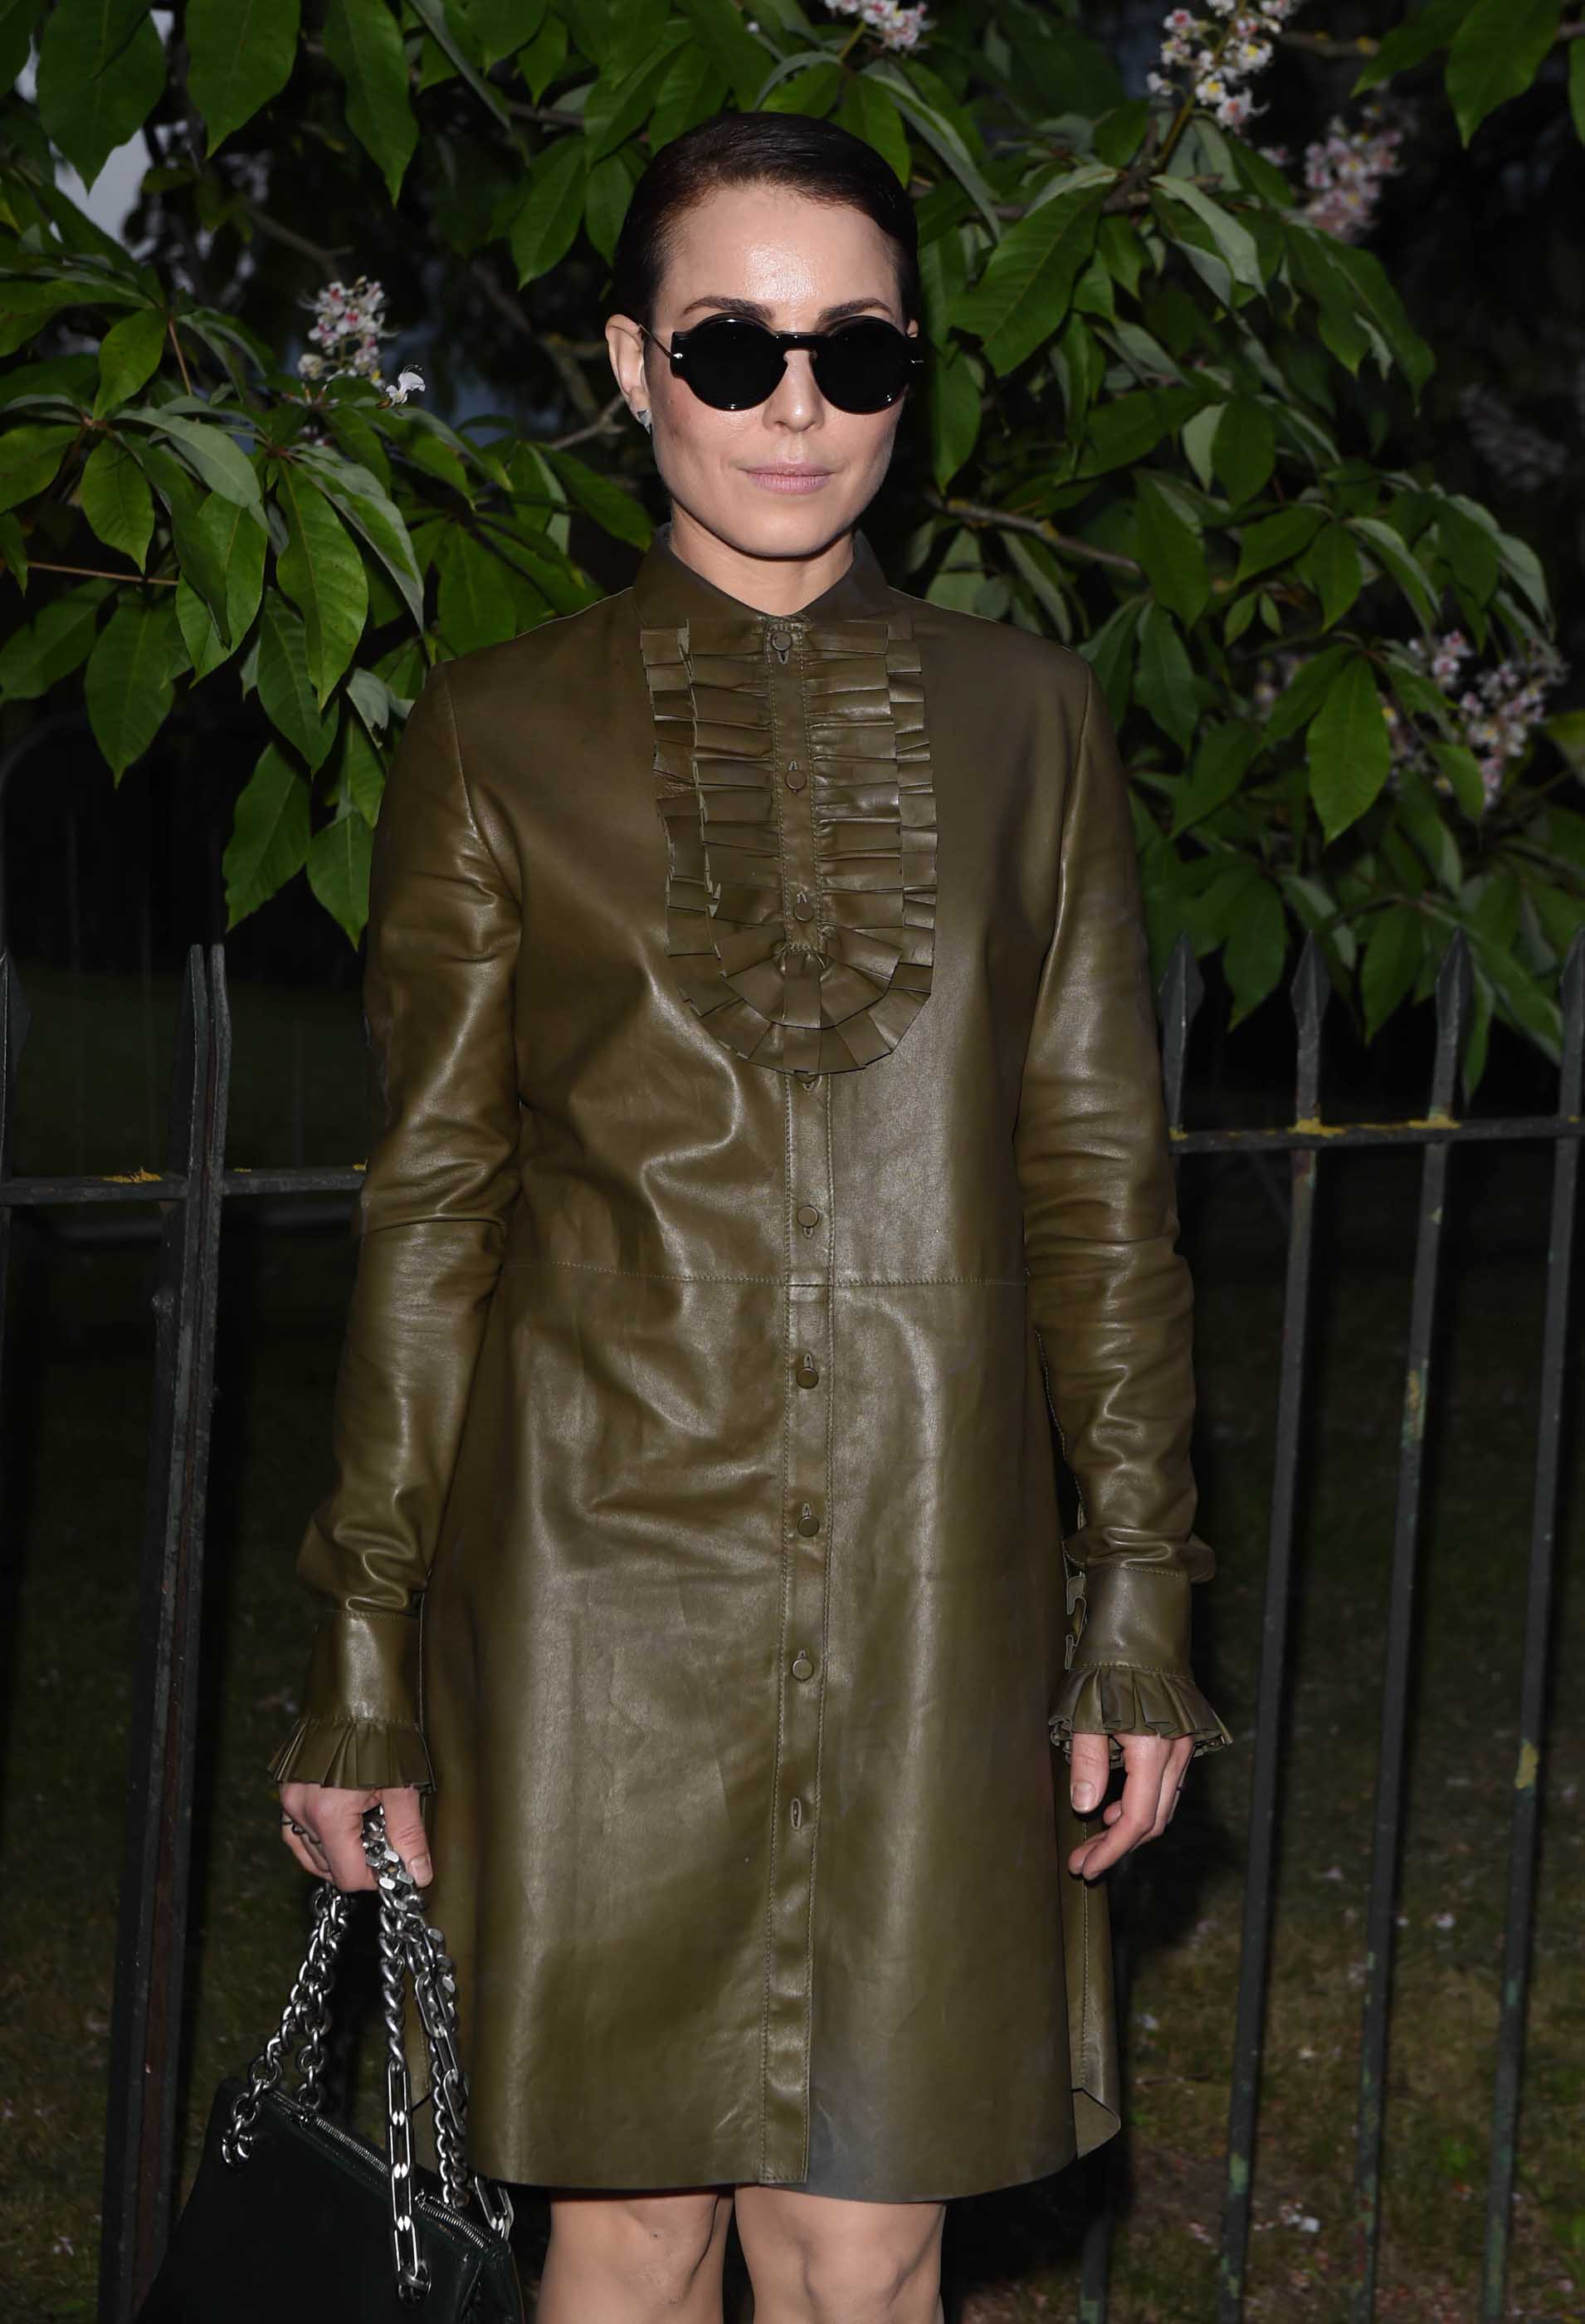 Noomi Rapace attends The Serpentine Summer Party